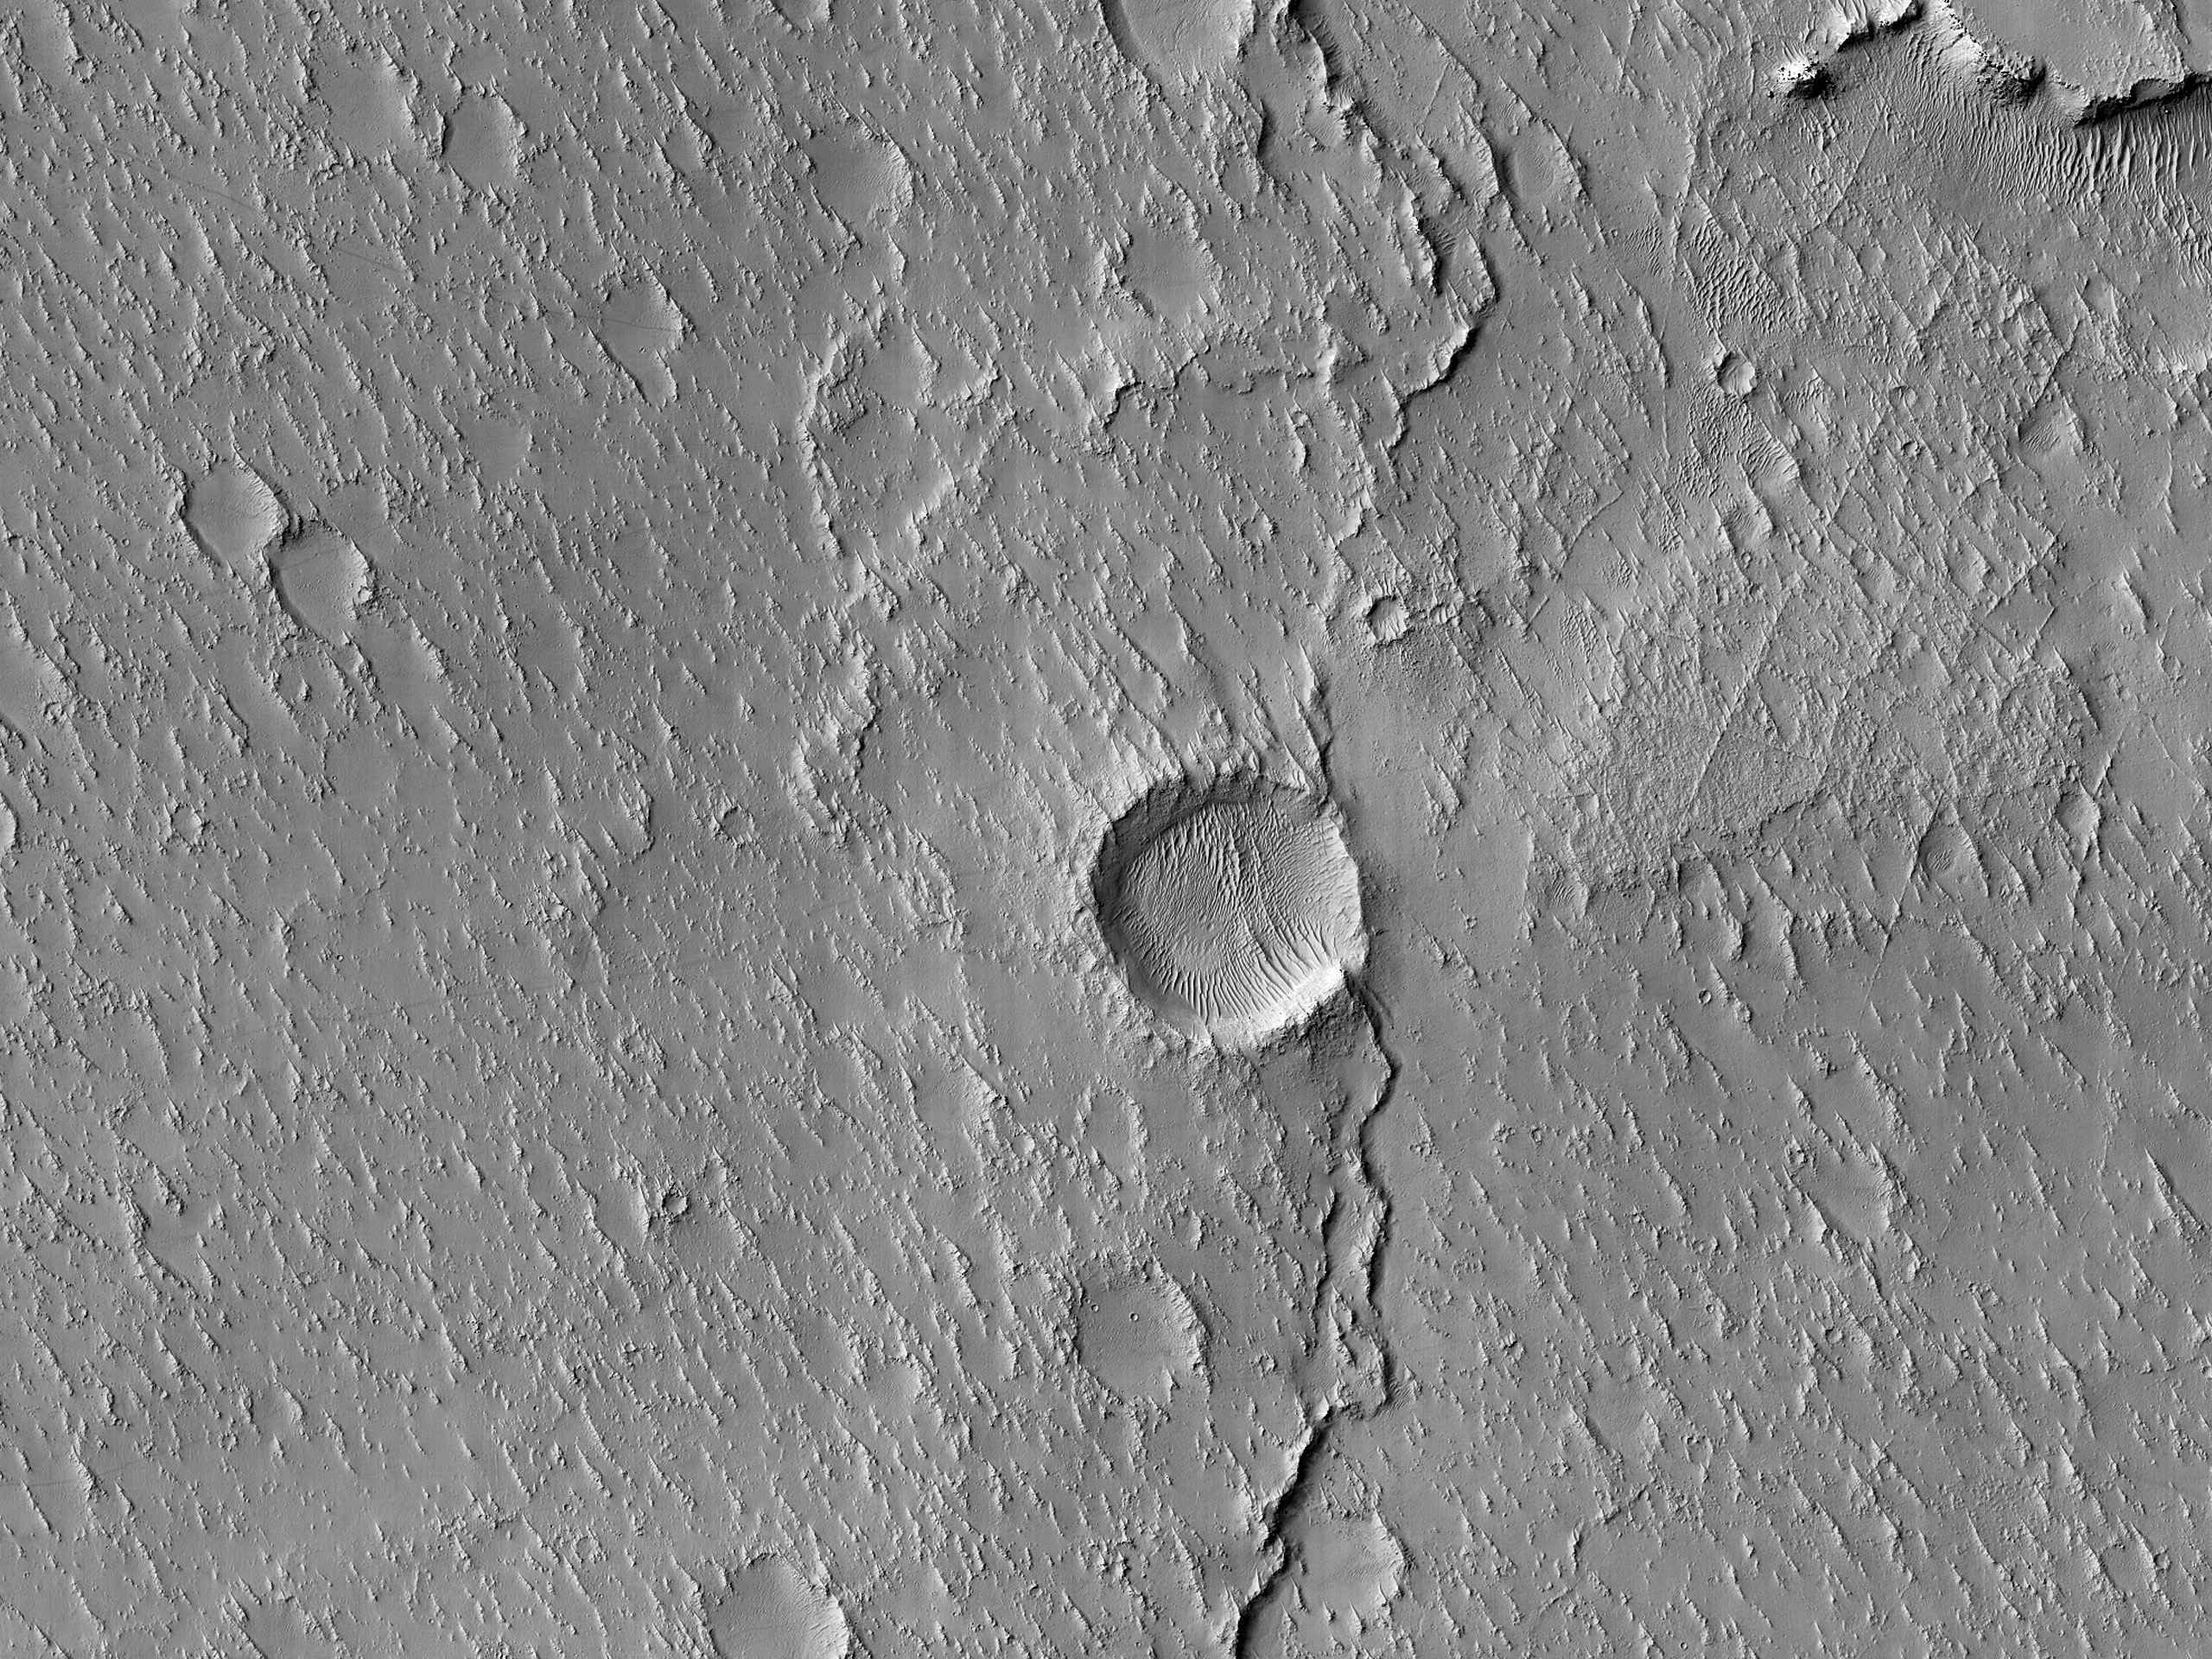 A Mare-Type Ridge Intersected by a Crater 